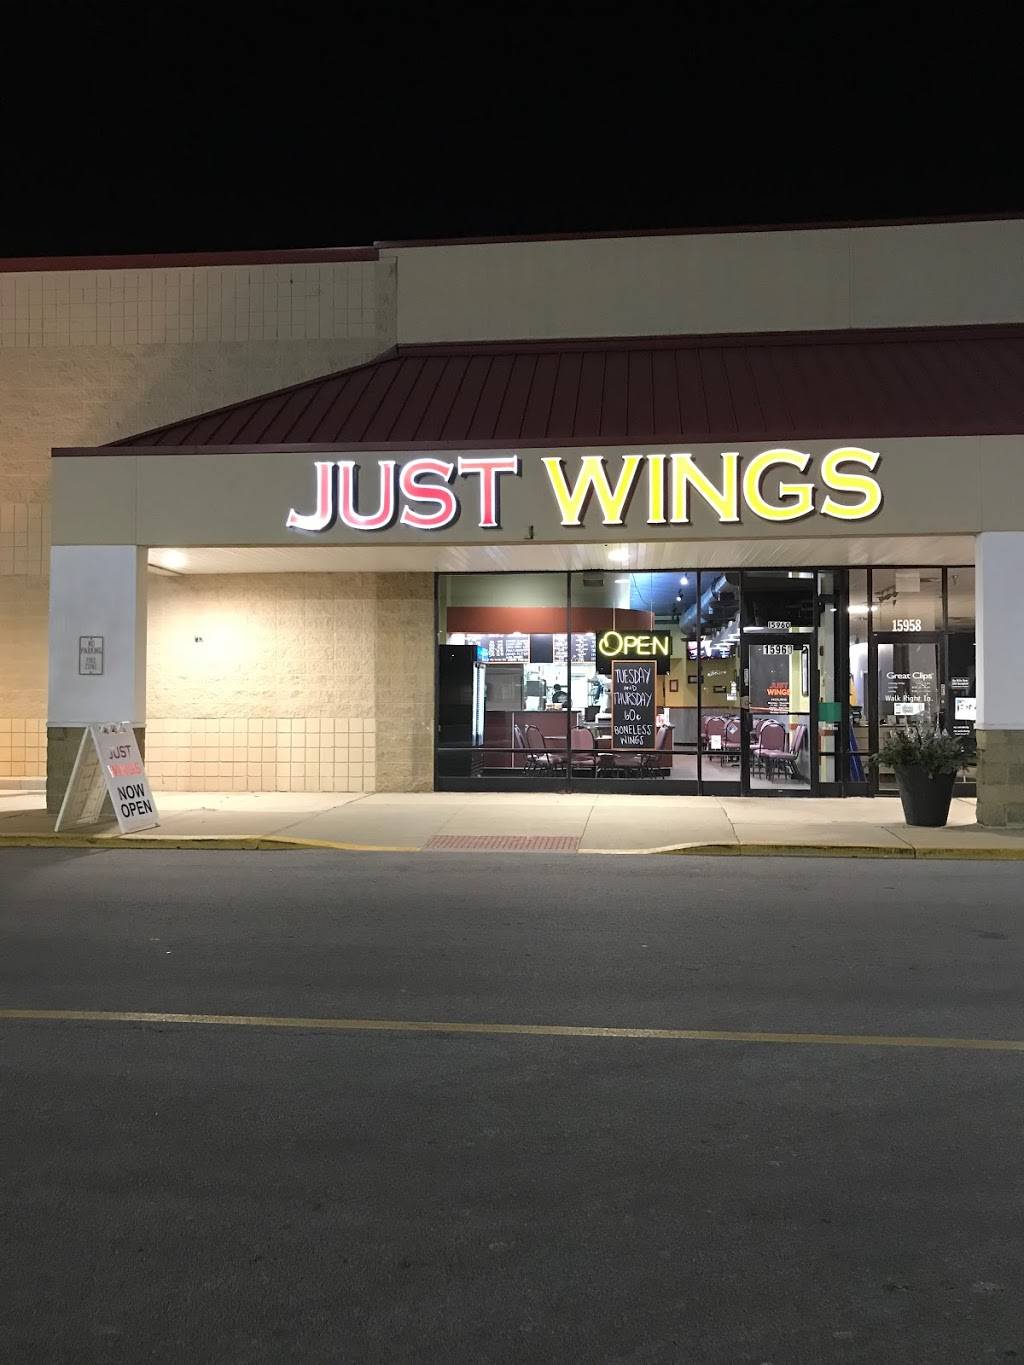 Just Wings Tinley Park IL | restaurant | 15960 Harlem Ave, Tinley Park, IL 60477, USA | 7086208440 OR +1 708-620-8440